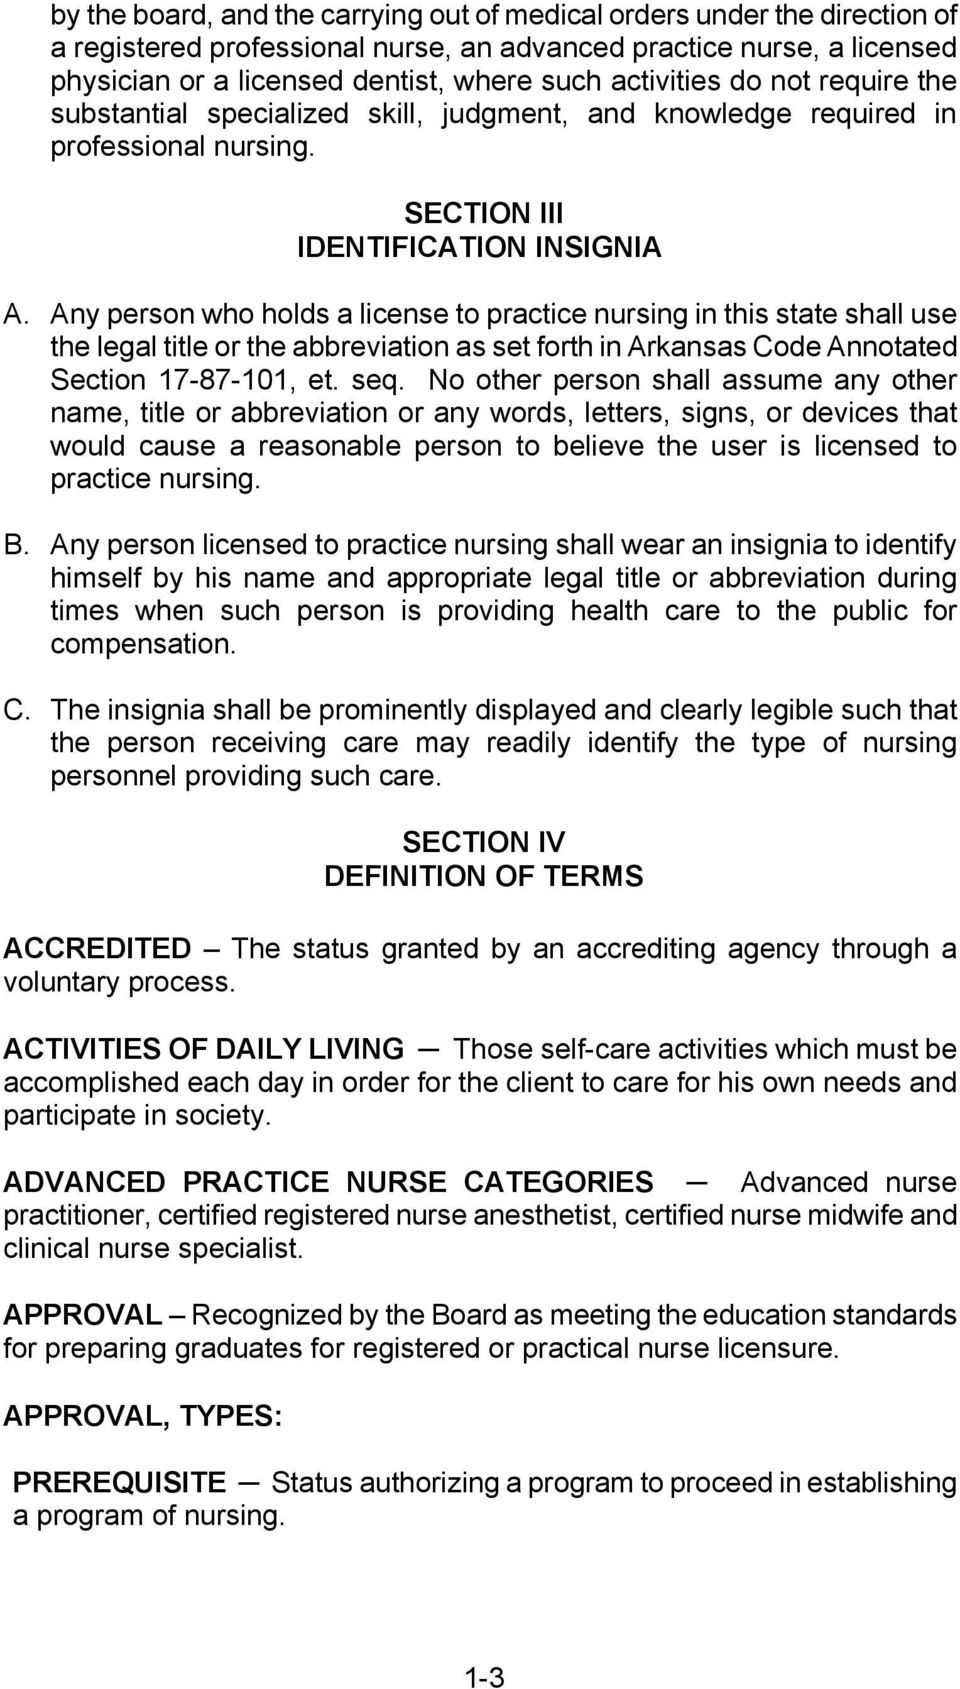 Any person who holds a license to practice nursing in this state shall use the legal title or the abbreviation as set forth in Arkansas Code Annotated Section 17-87-101, et. seq.